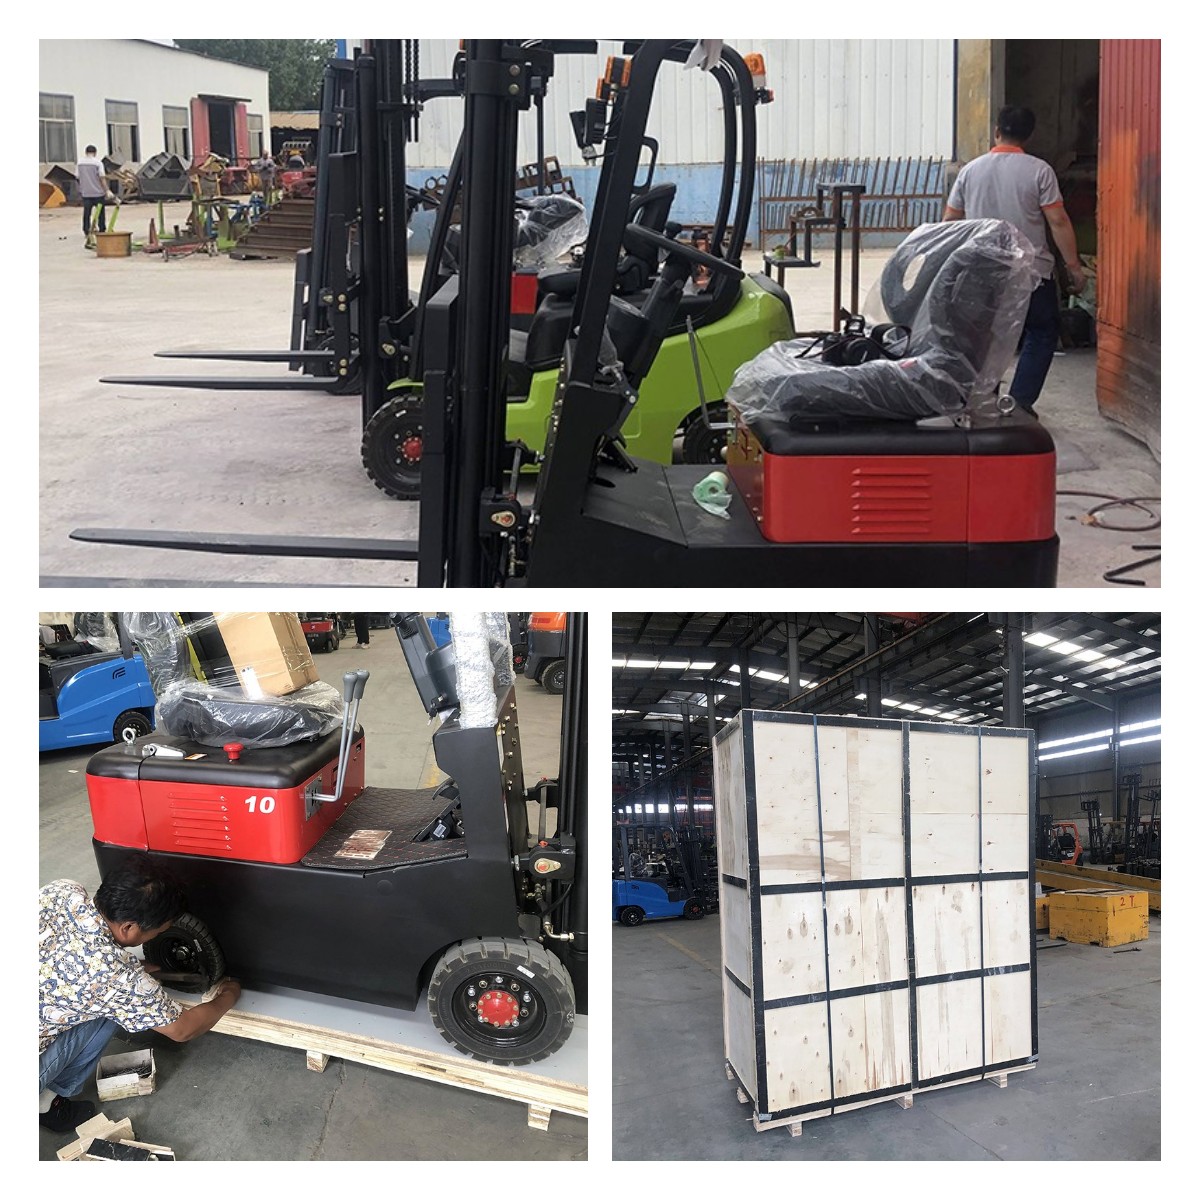 HITOP 3 units 1Ton electric forklifts were delivered to a client in France